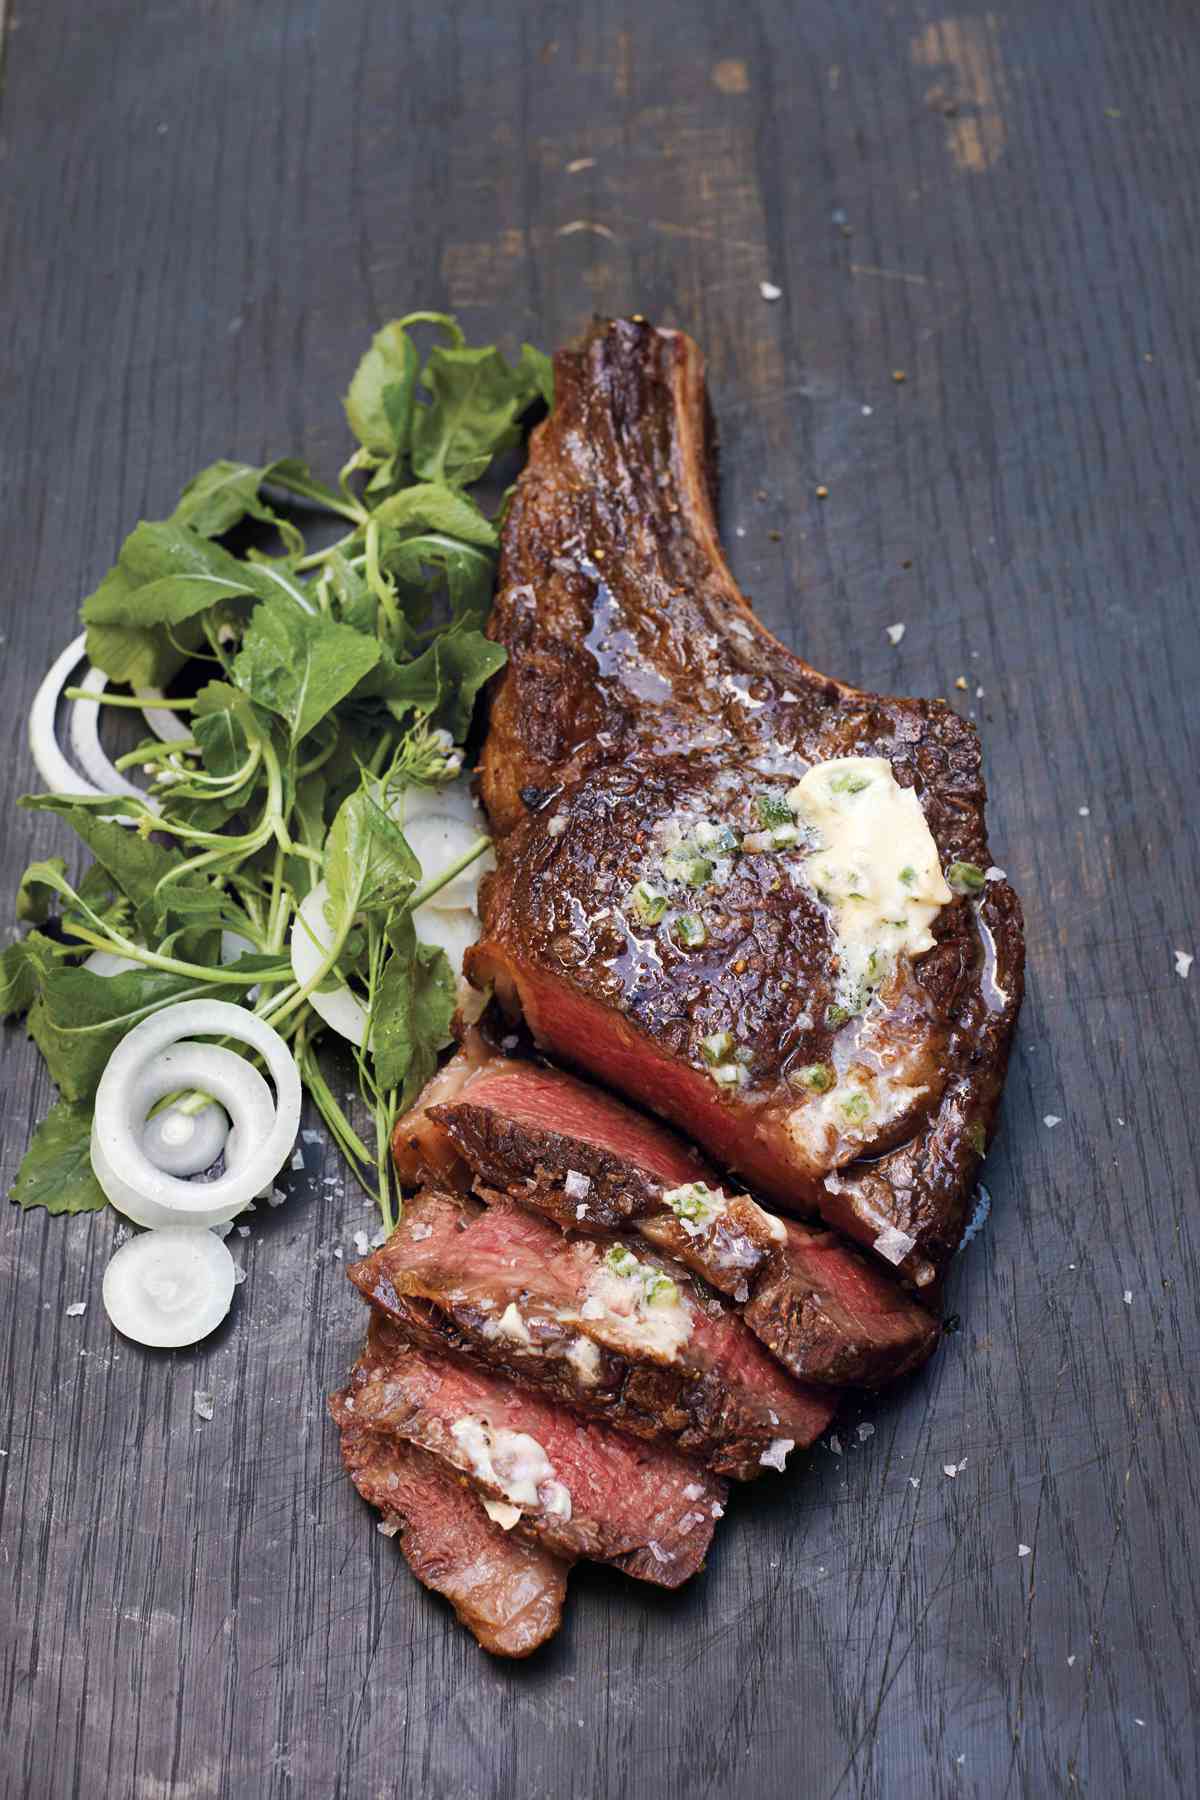 rib eye with jalapeno butter on a wooden surface